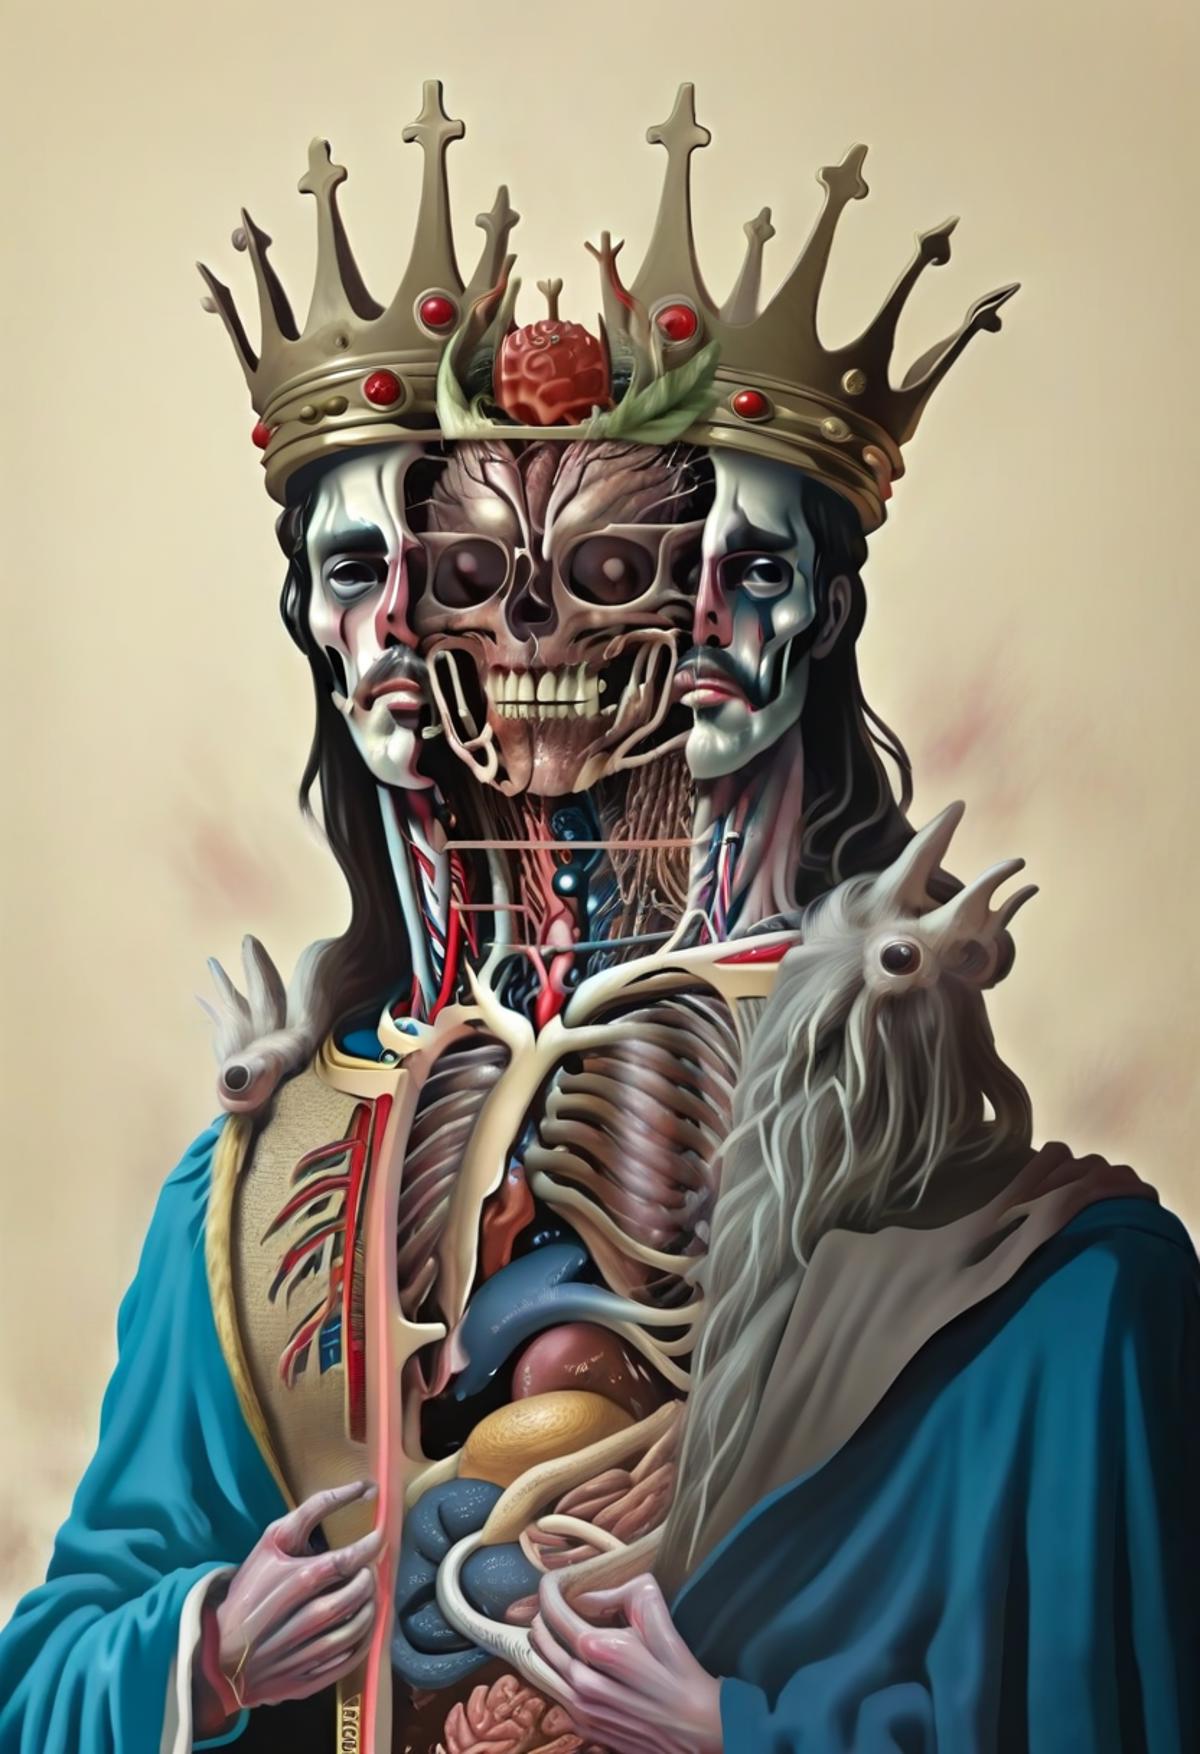 A skeleton with a crown and a blue robe, surrounded by other skeletons wearing crowns.